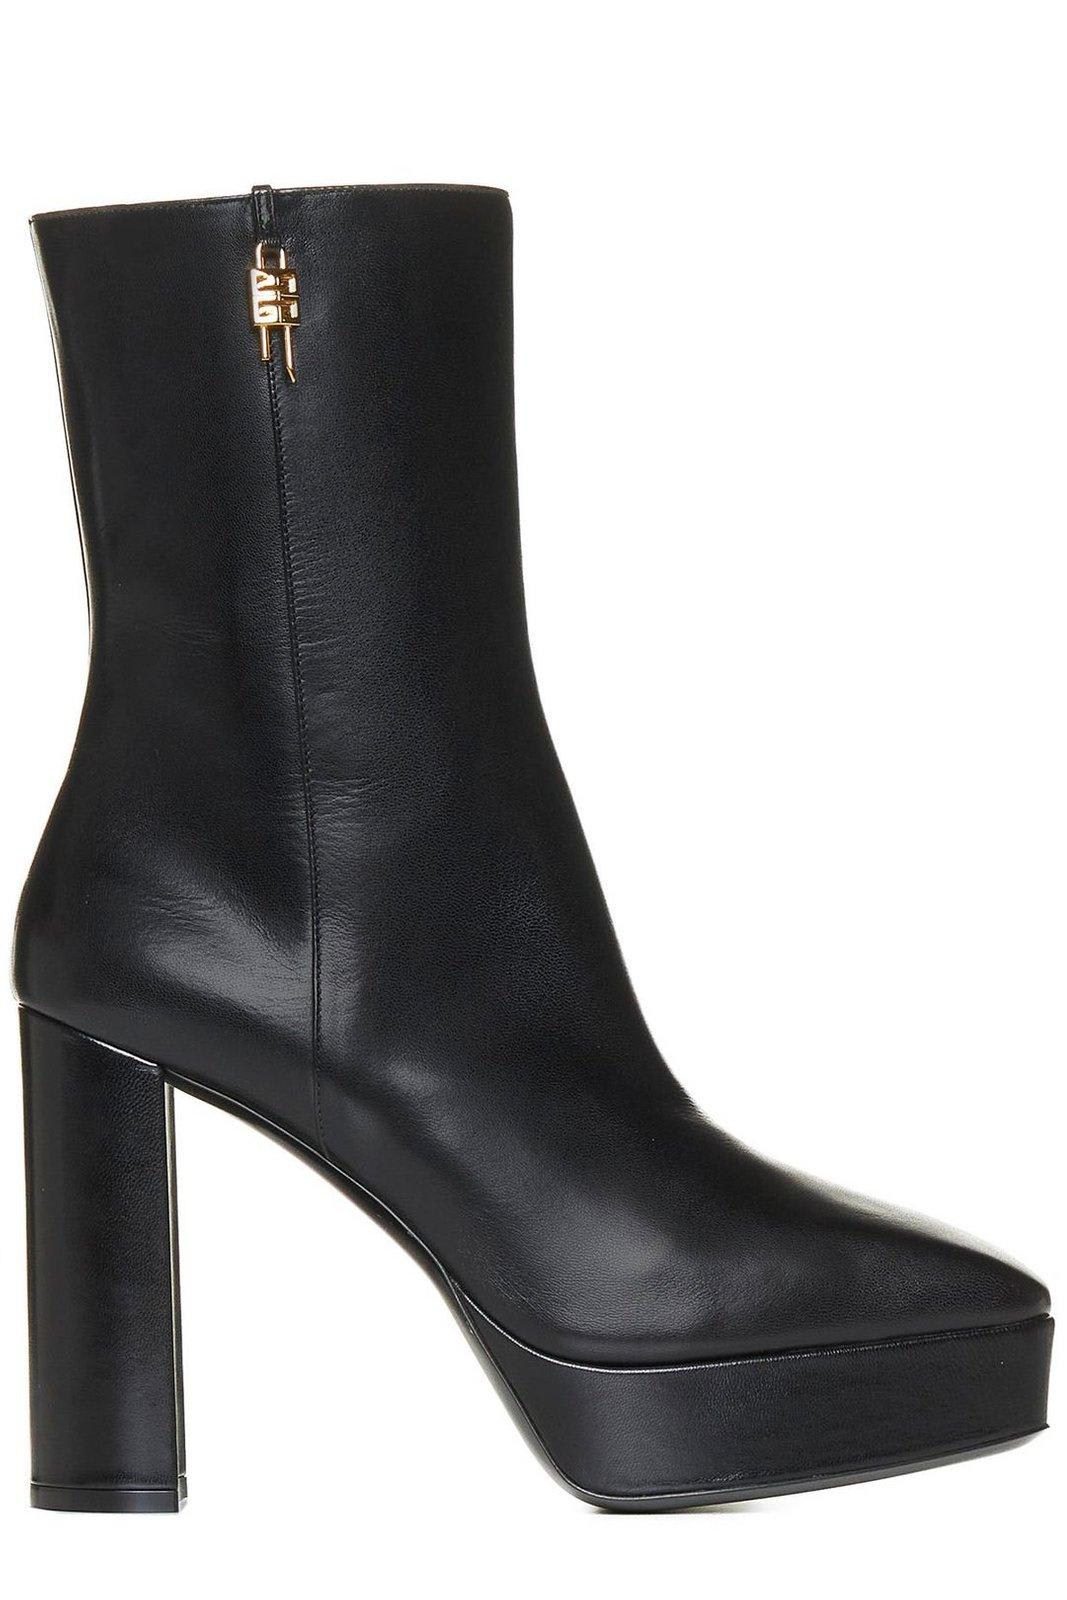 Givenchy G Lock Platform Ankle Boots